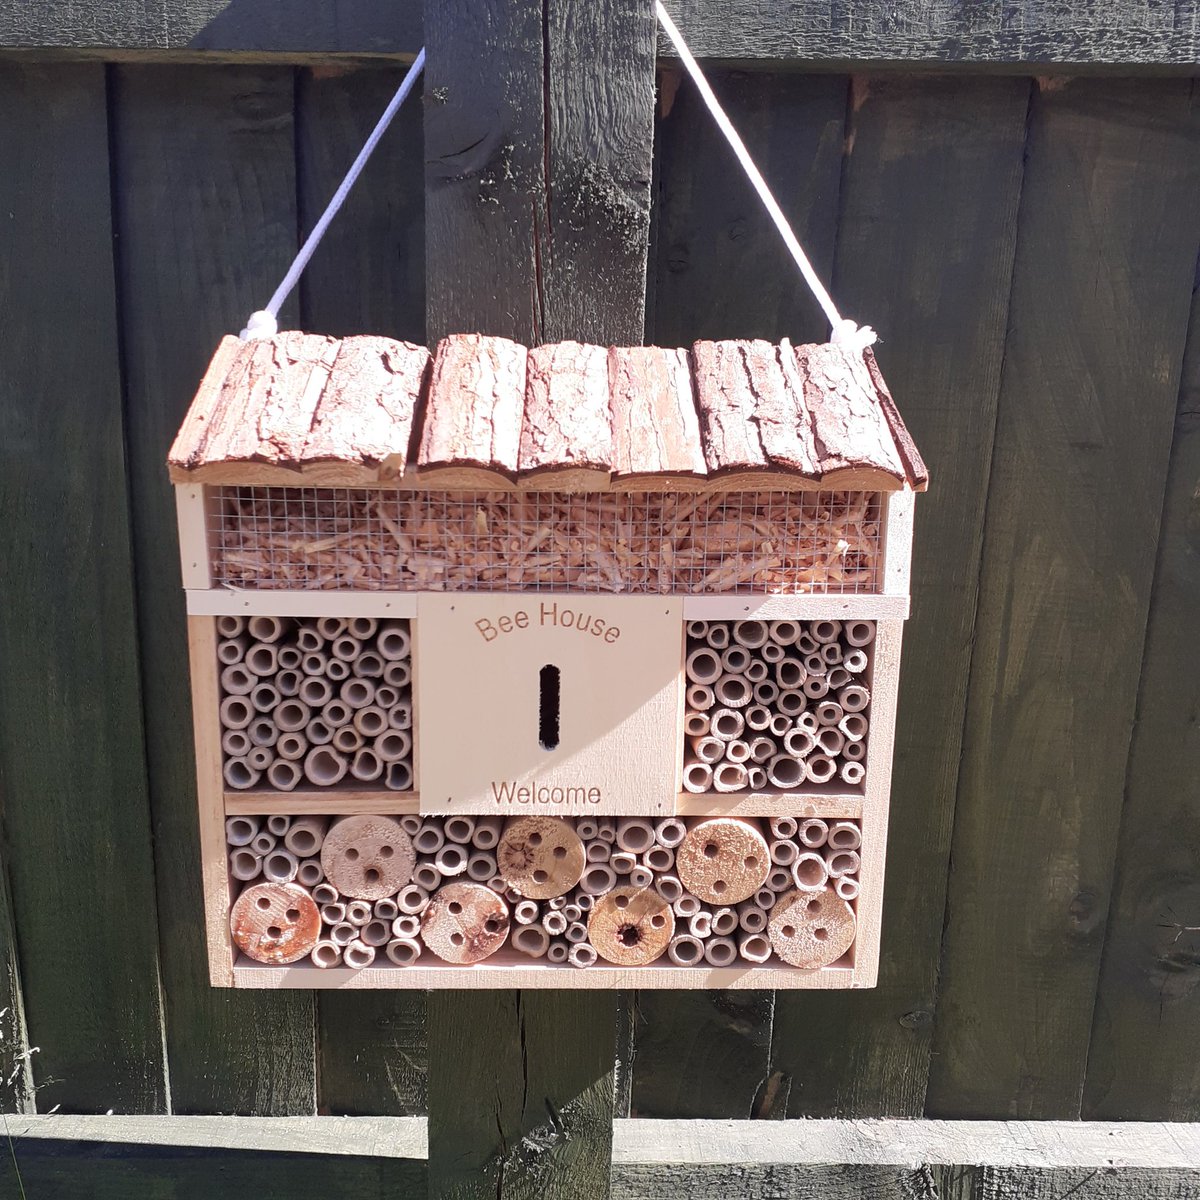 Hoping for some residents soon #wildlife #Bees #naturegarden